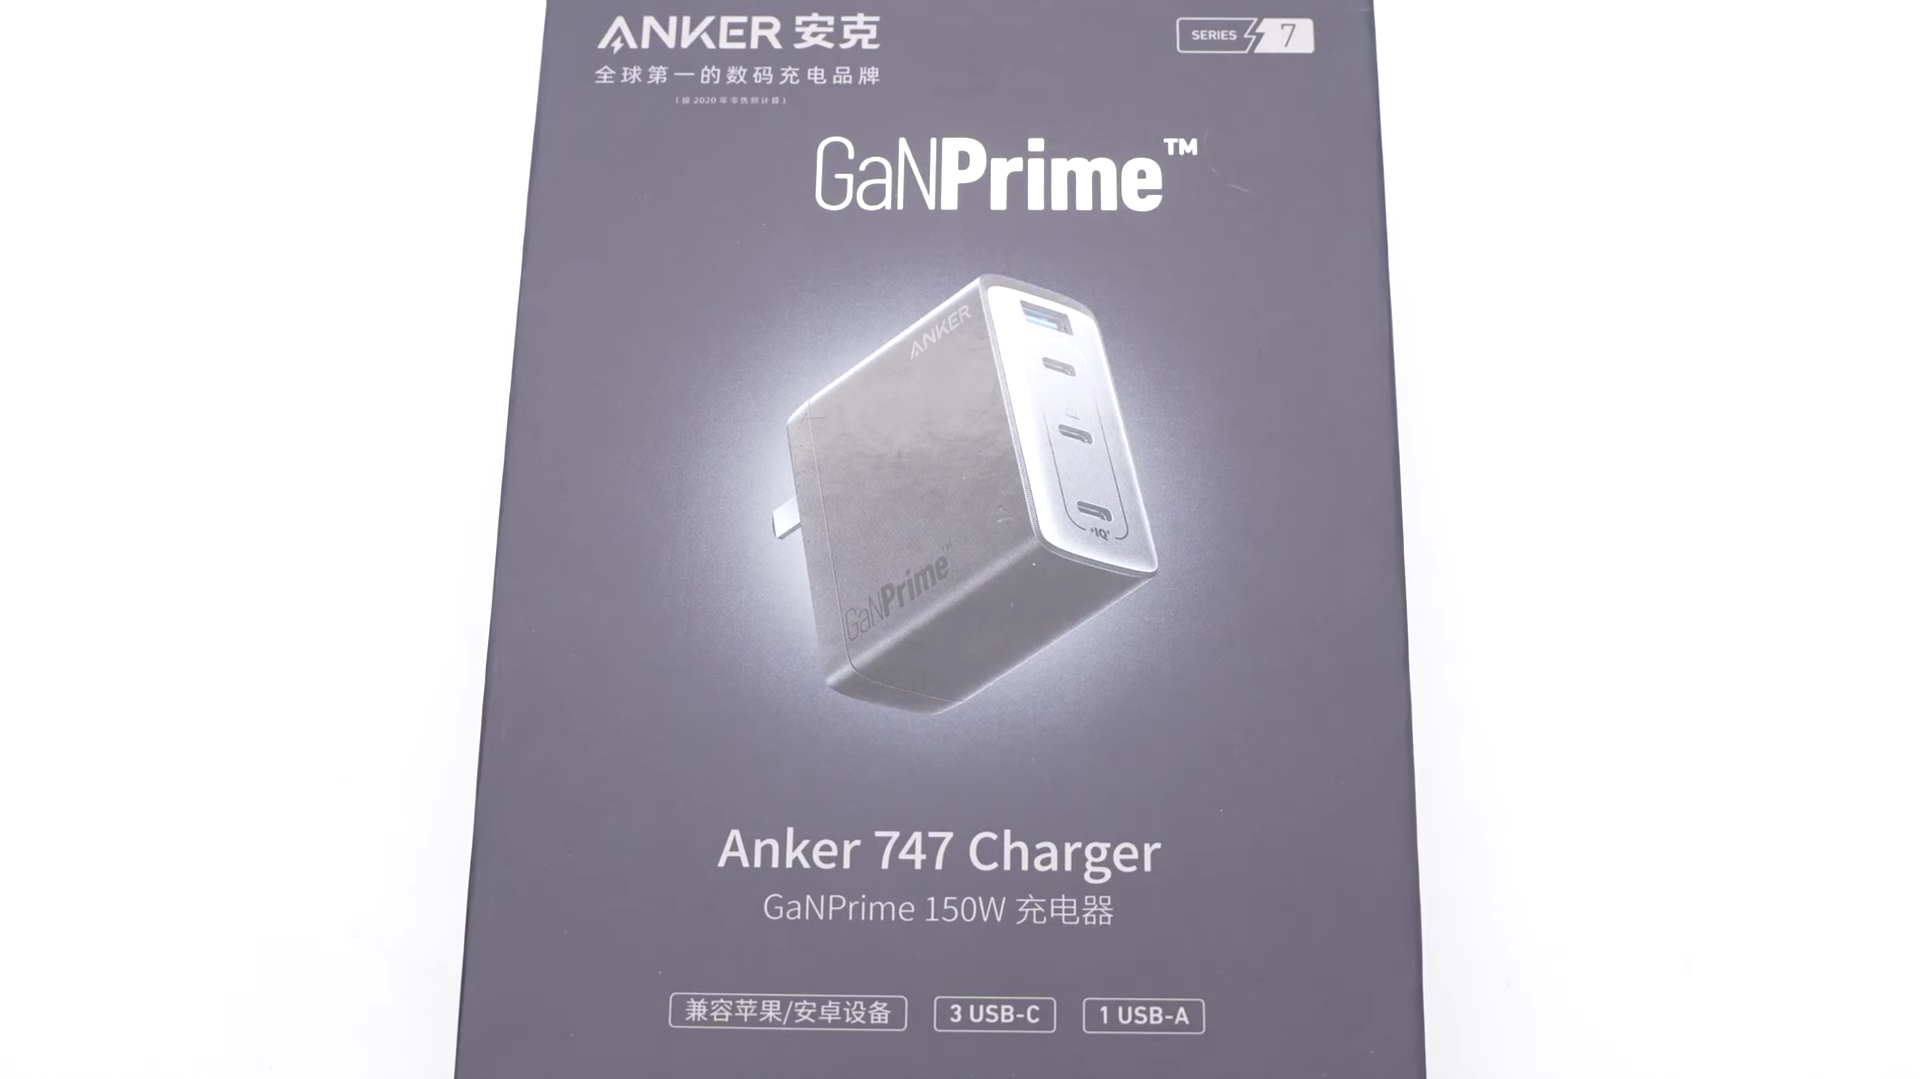 Teardown of Anker 150W GaNPrime 747 Charger (A2340) - Chargerlab